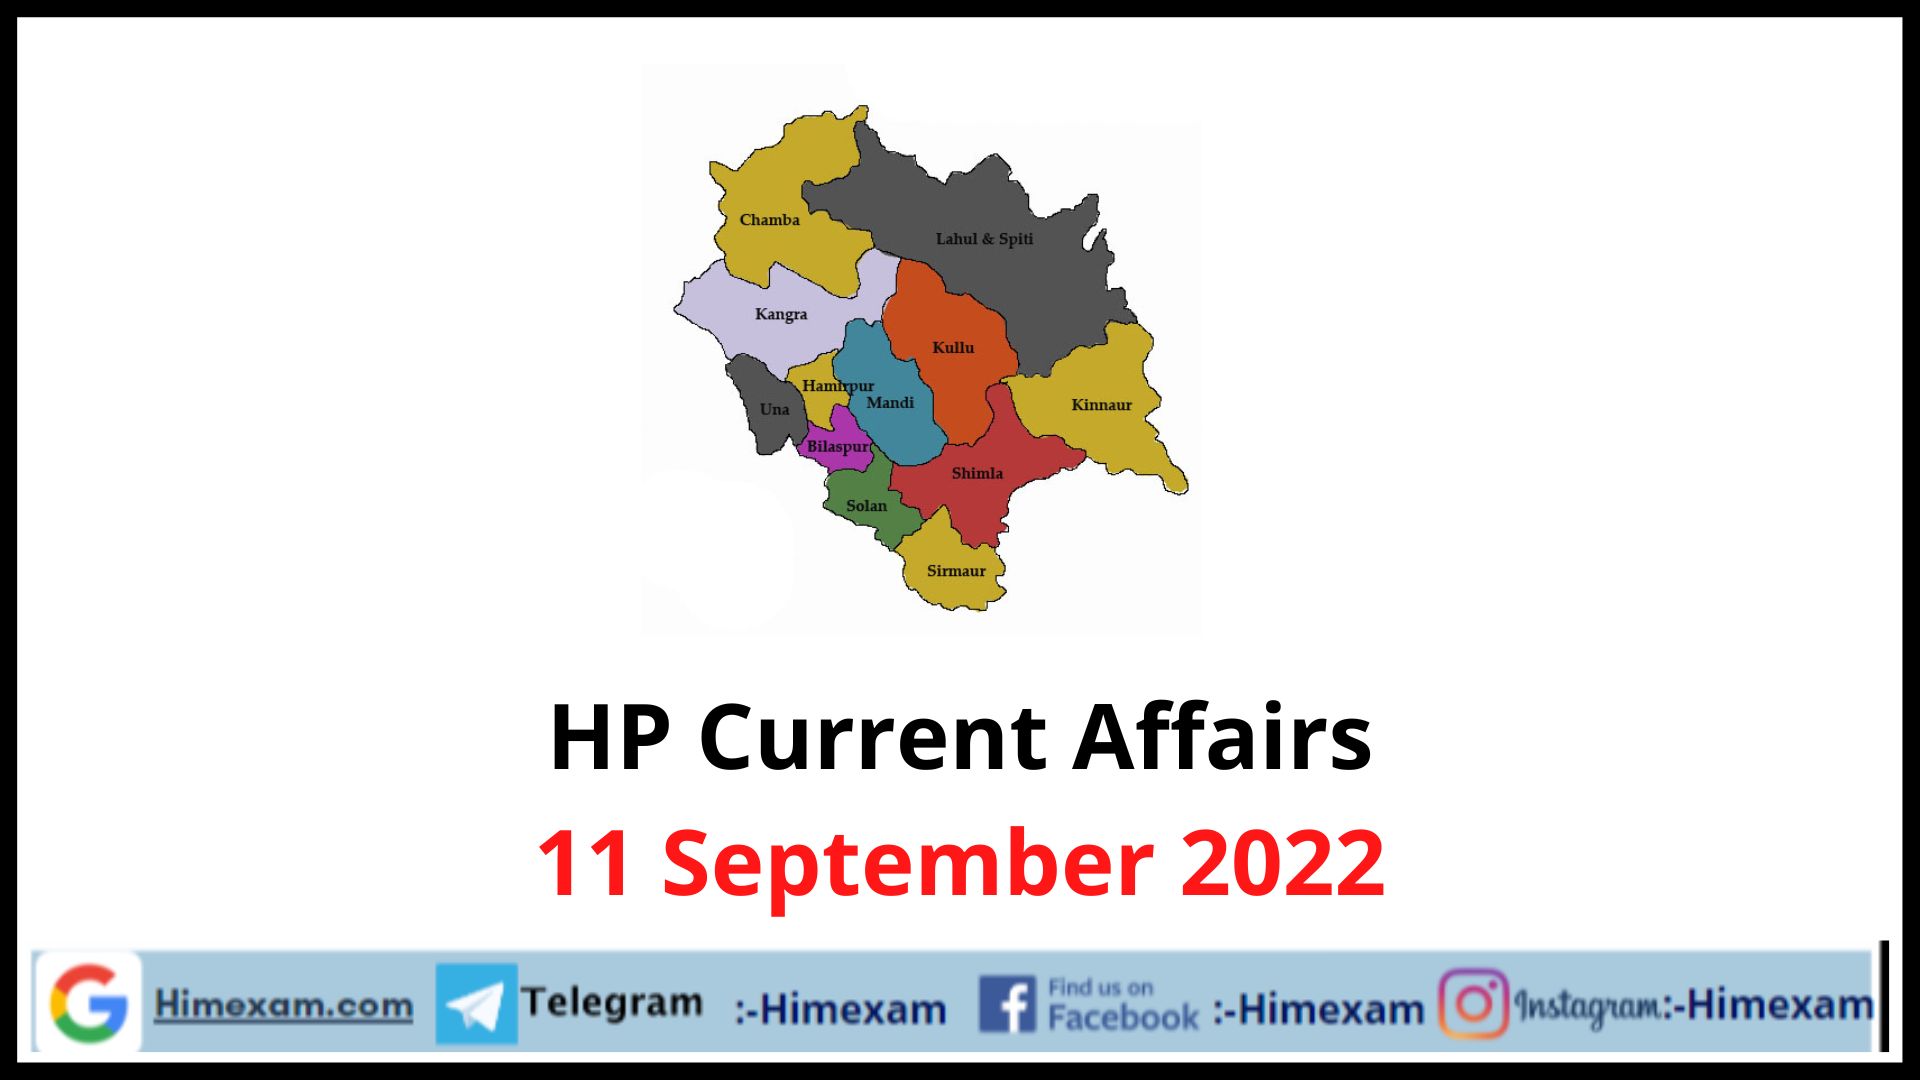 HP Current Affairs 11 September 2022